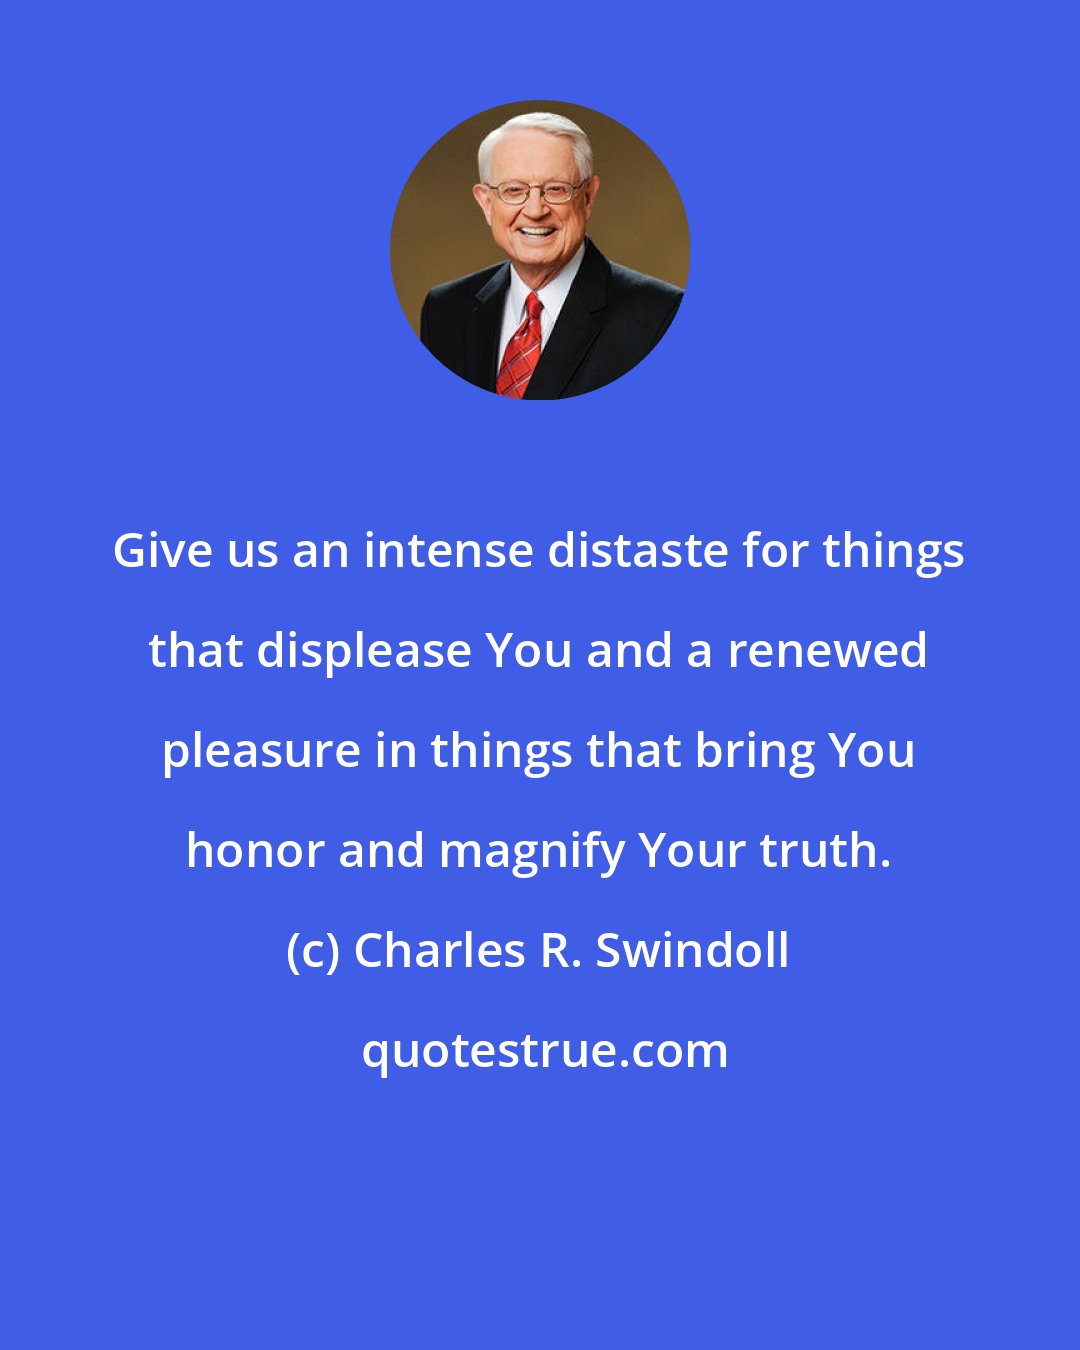 Charles R. Swindoll: Give us an intense distaste for things that displease You and a renewed pleasure in things that bring You honor and magnify Your truth.